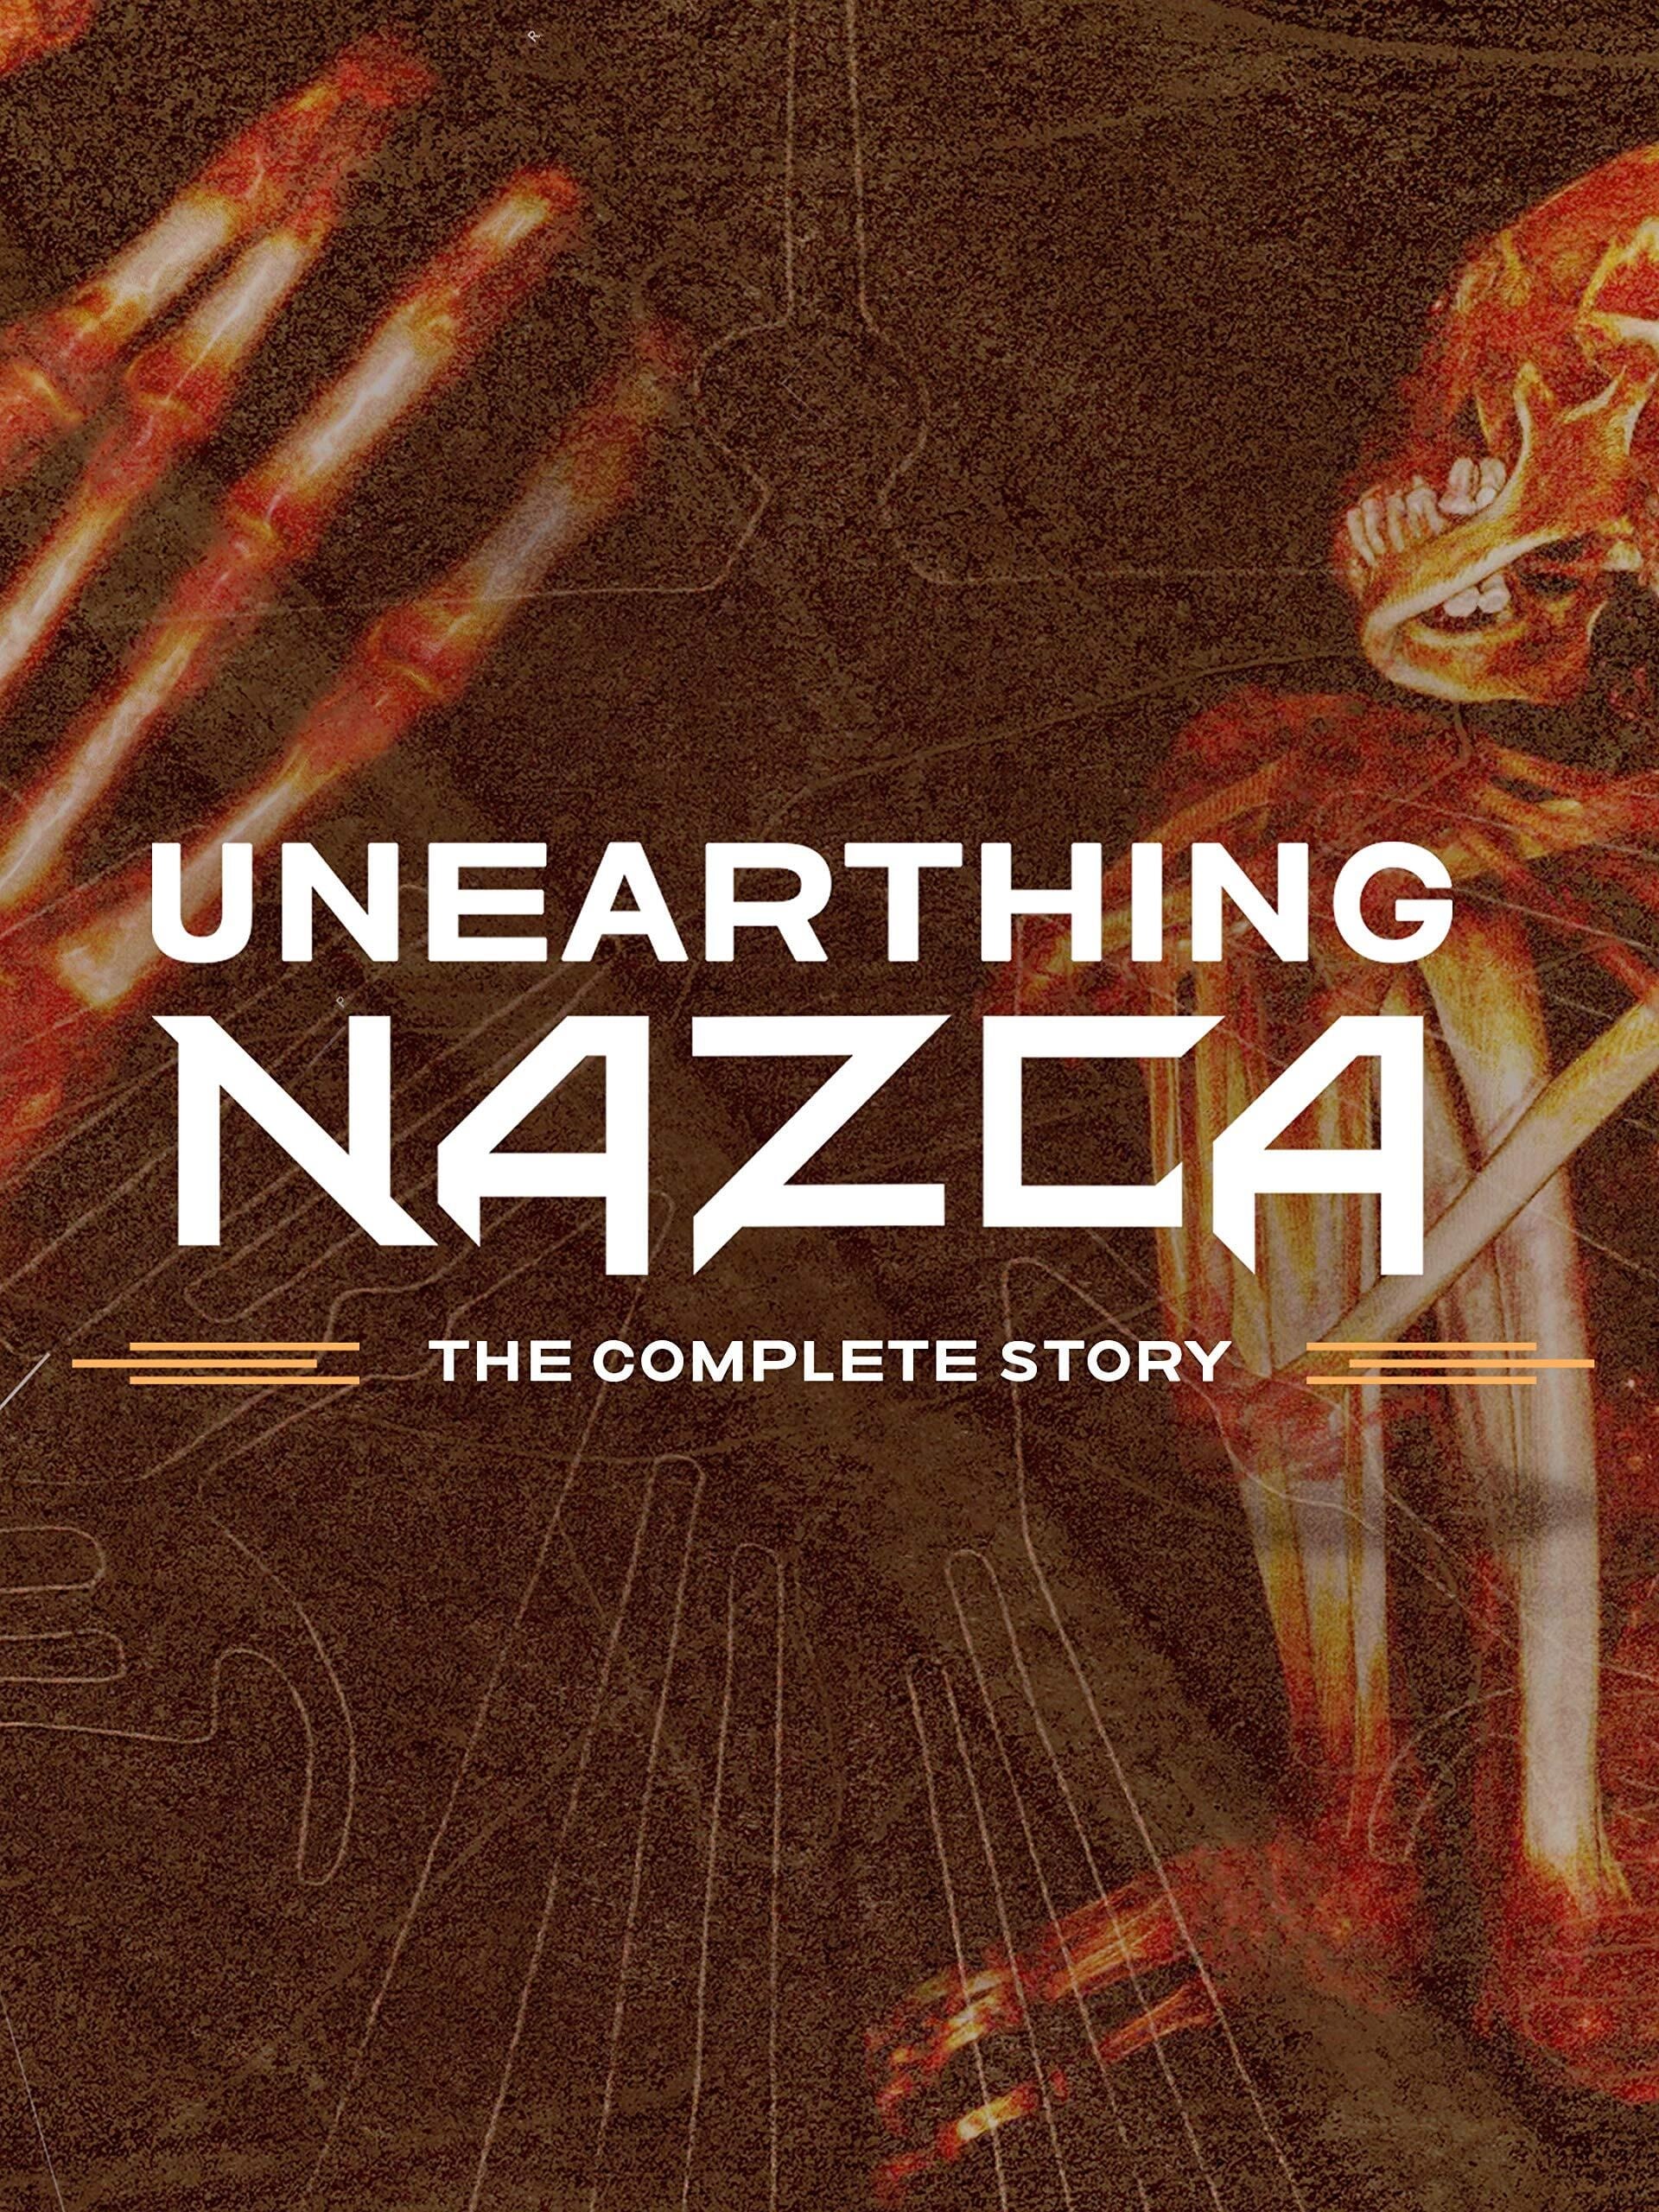 Unearthing Nazca: The Complete Story